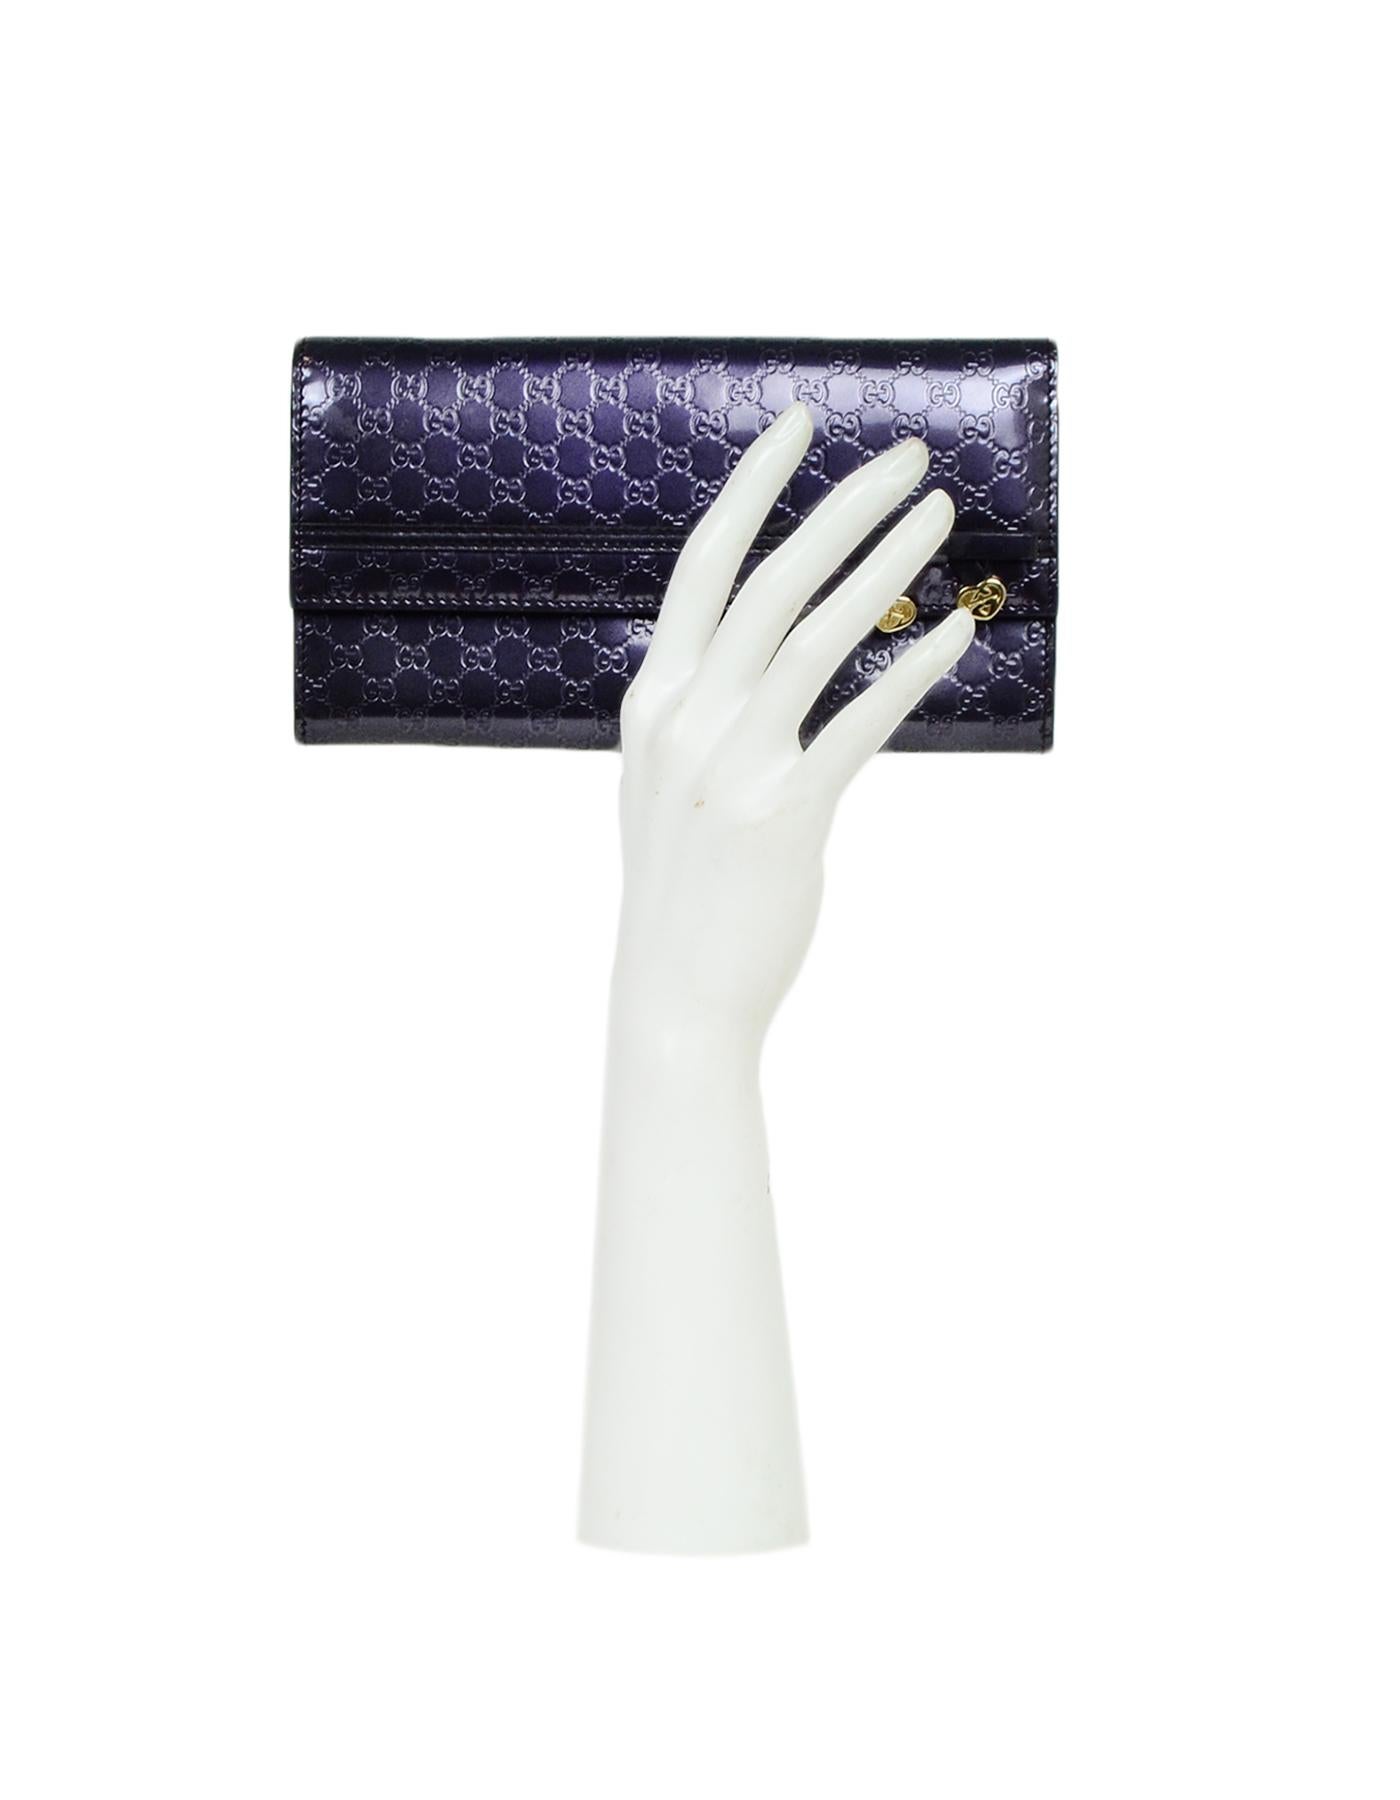 Gucci Purple Glazed Leather Micro Guccisima Monogram Candy Shine Continental Wallet

Color: Purple
Hardware: Goldtone hardware
Materials: Glazed leather
Lining: Purple textile lining
Closure/Opening: Top flap with snap
Exterior Pockets: One slit